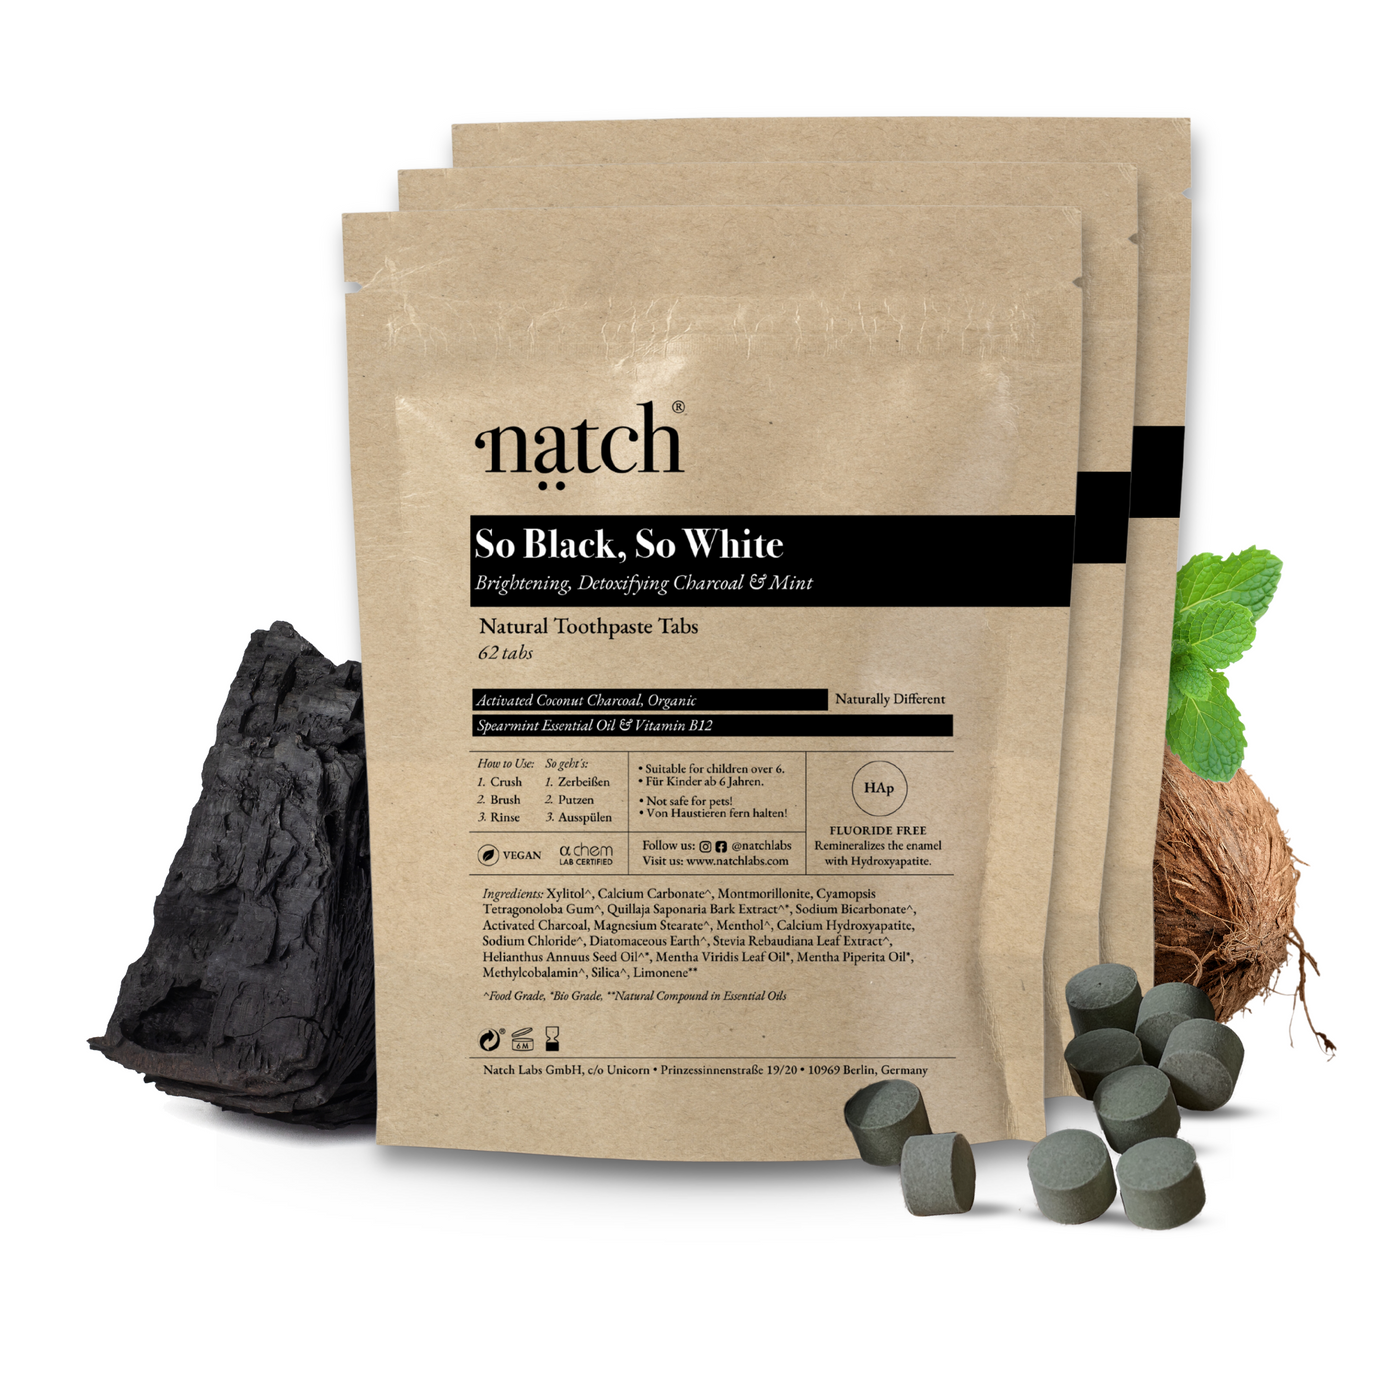 So Black, So White 3-Month Refill Bags - Natch Labs